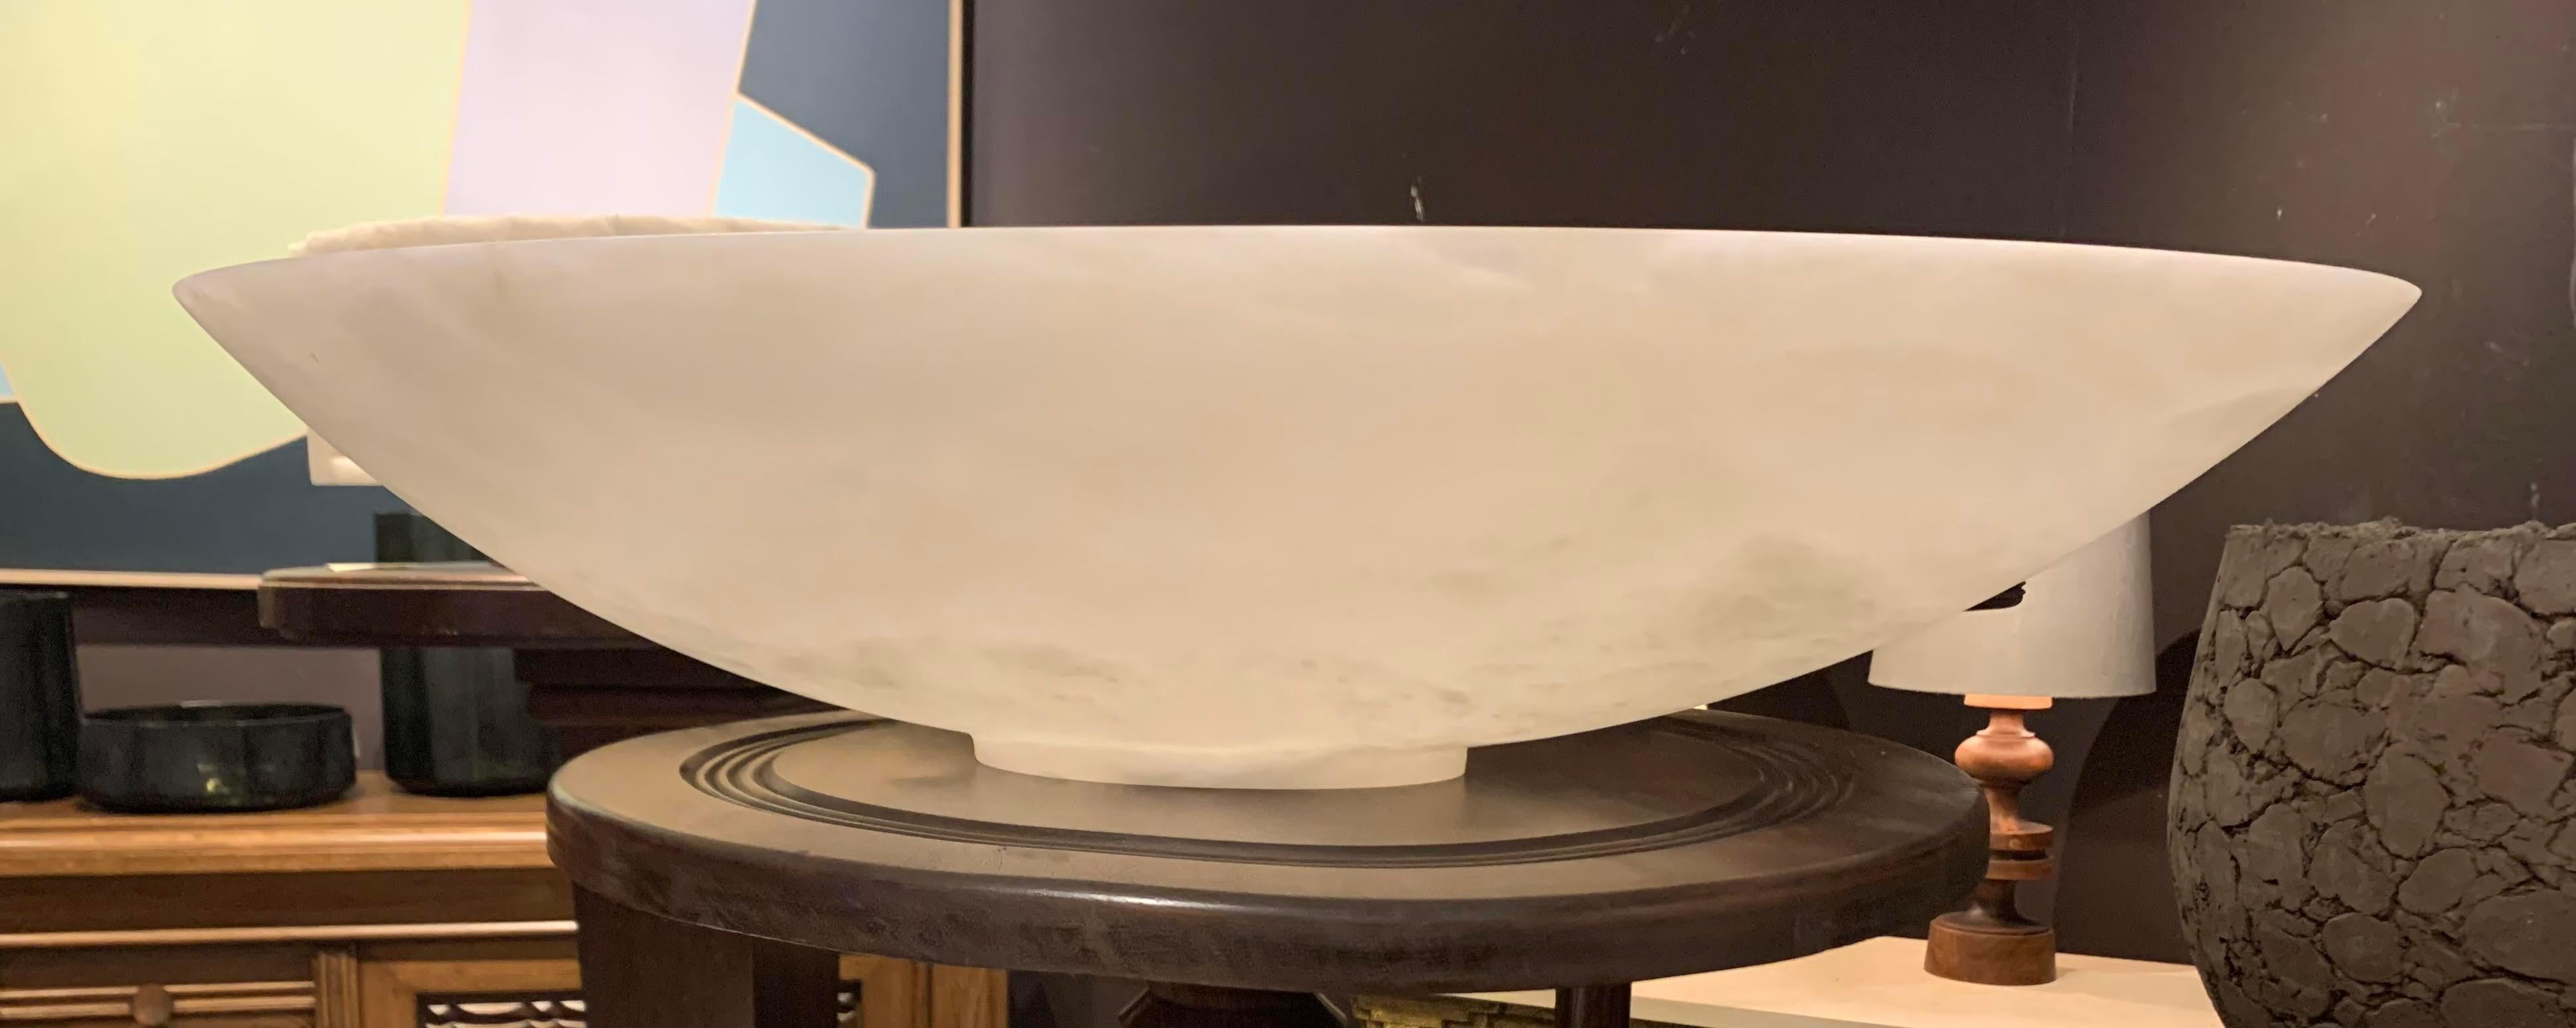 Italian White Alabaster Large Oval Shaped Bowl, Italy, Contemporary For Sale